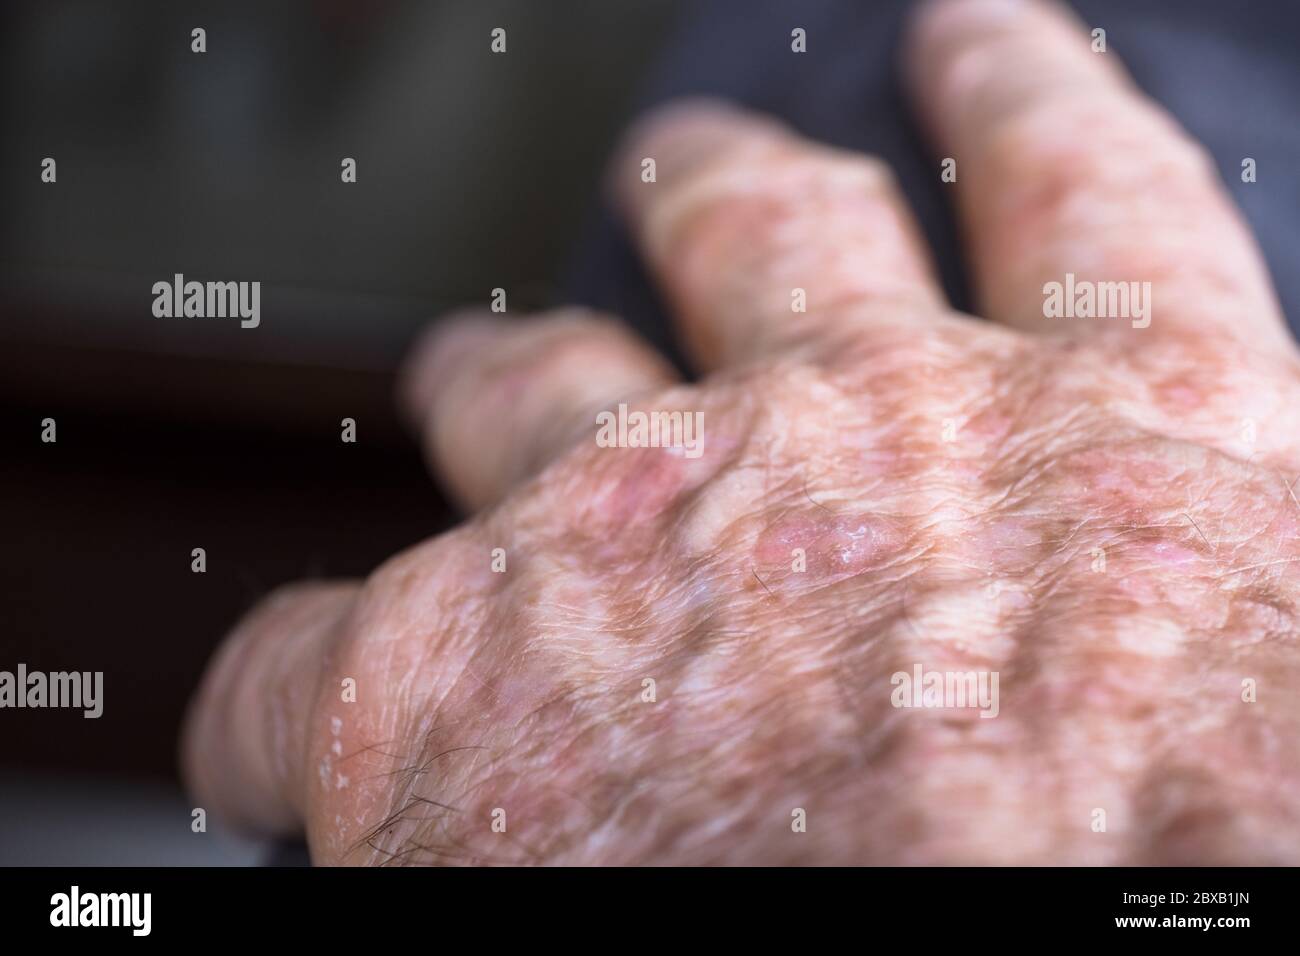 Lesions of actinic keratosis or sunspots on sun-damaged skin of the hand of a man. This can be treated with cryosurgery or certain ointments Stock Photo